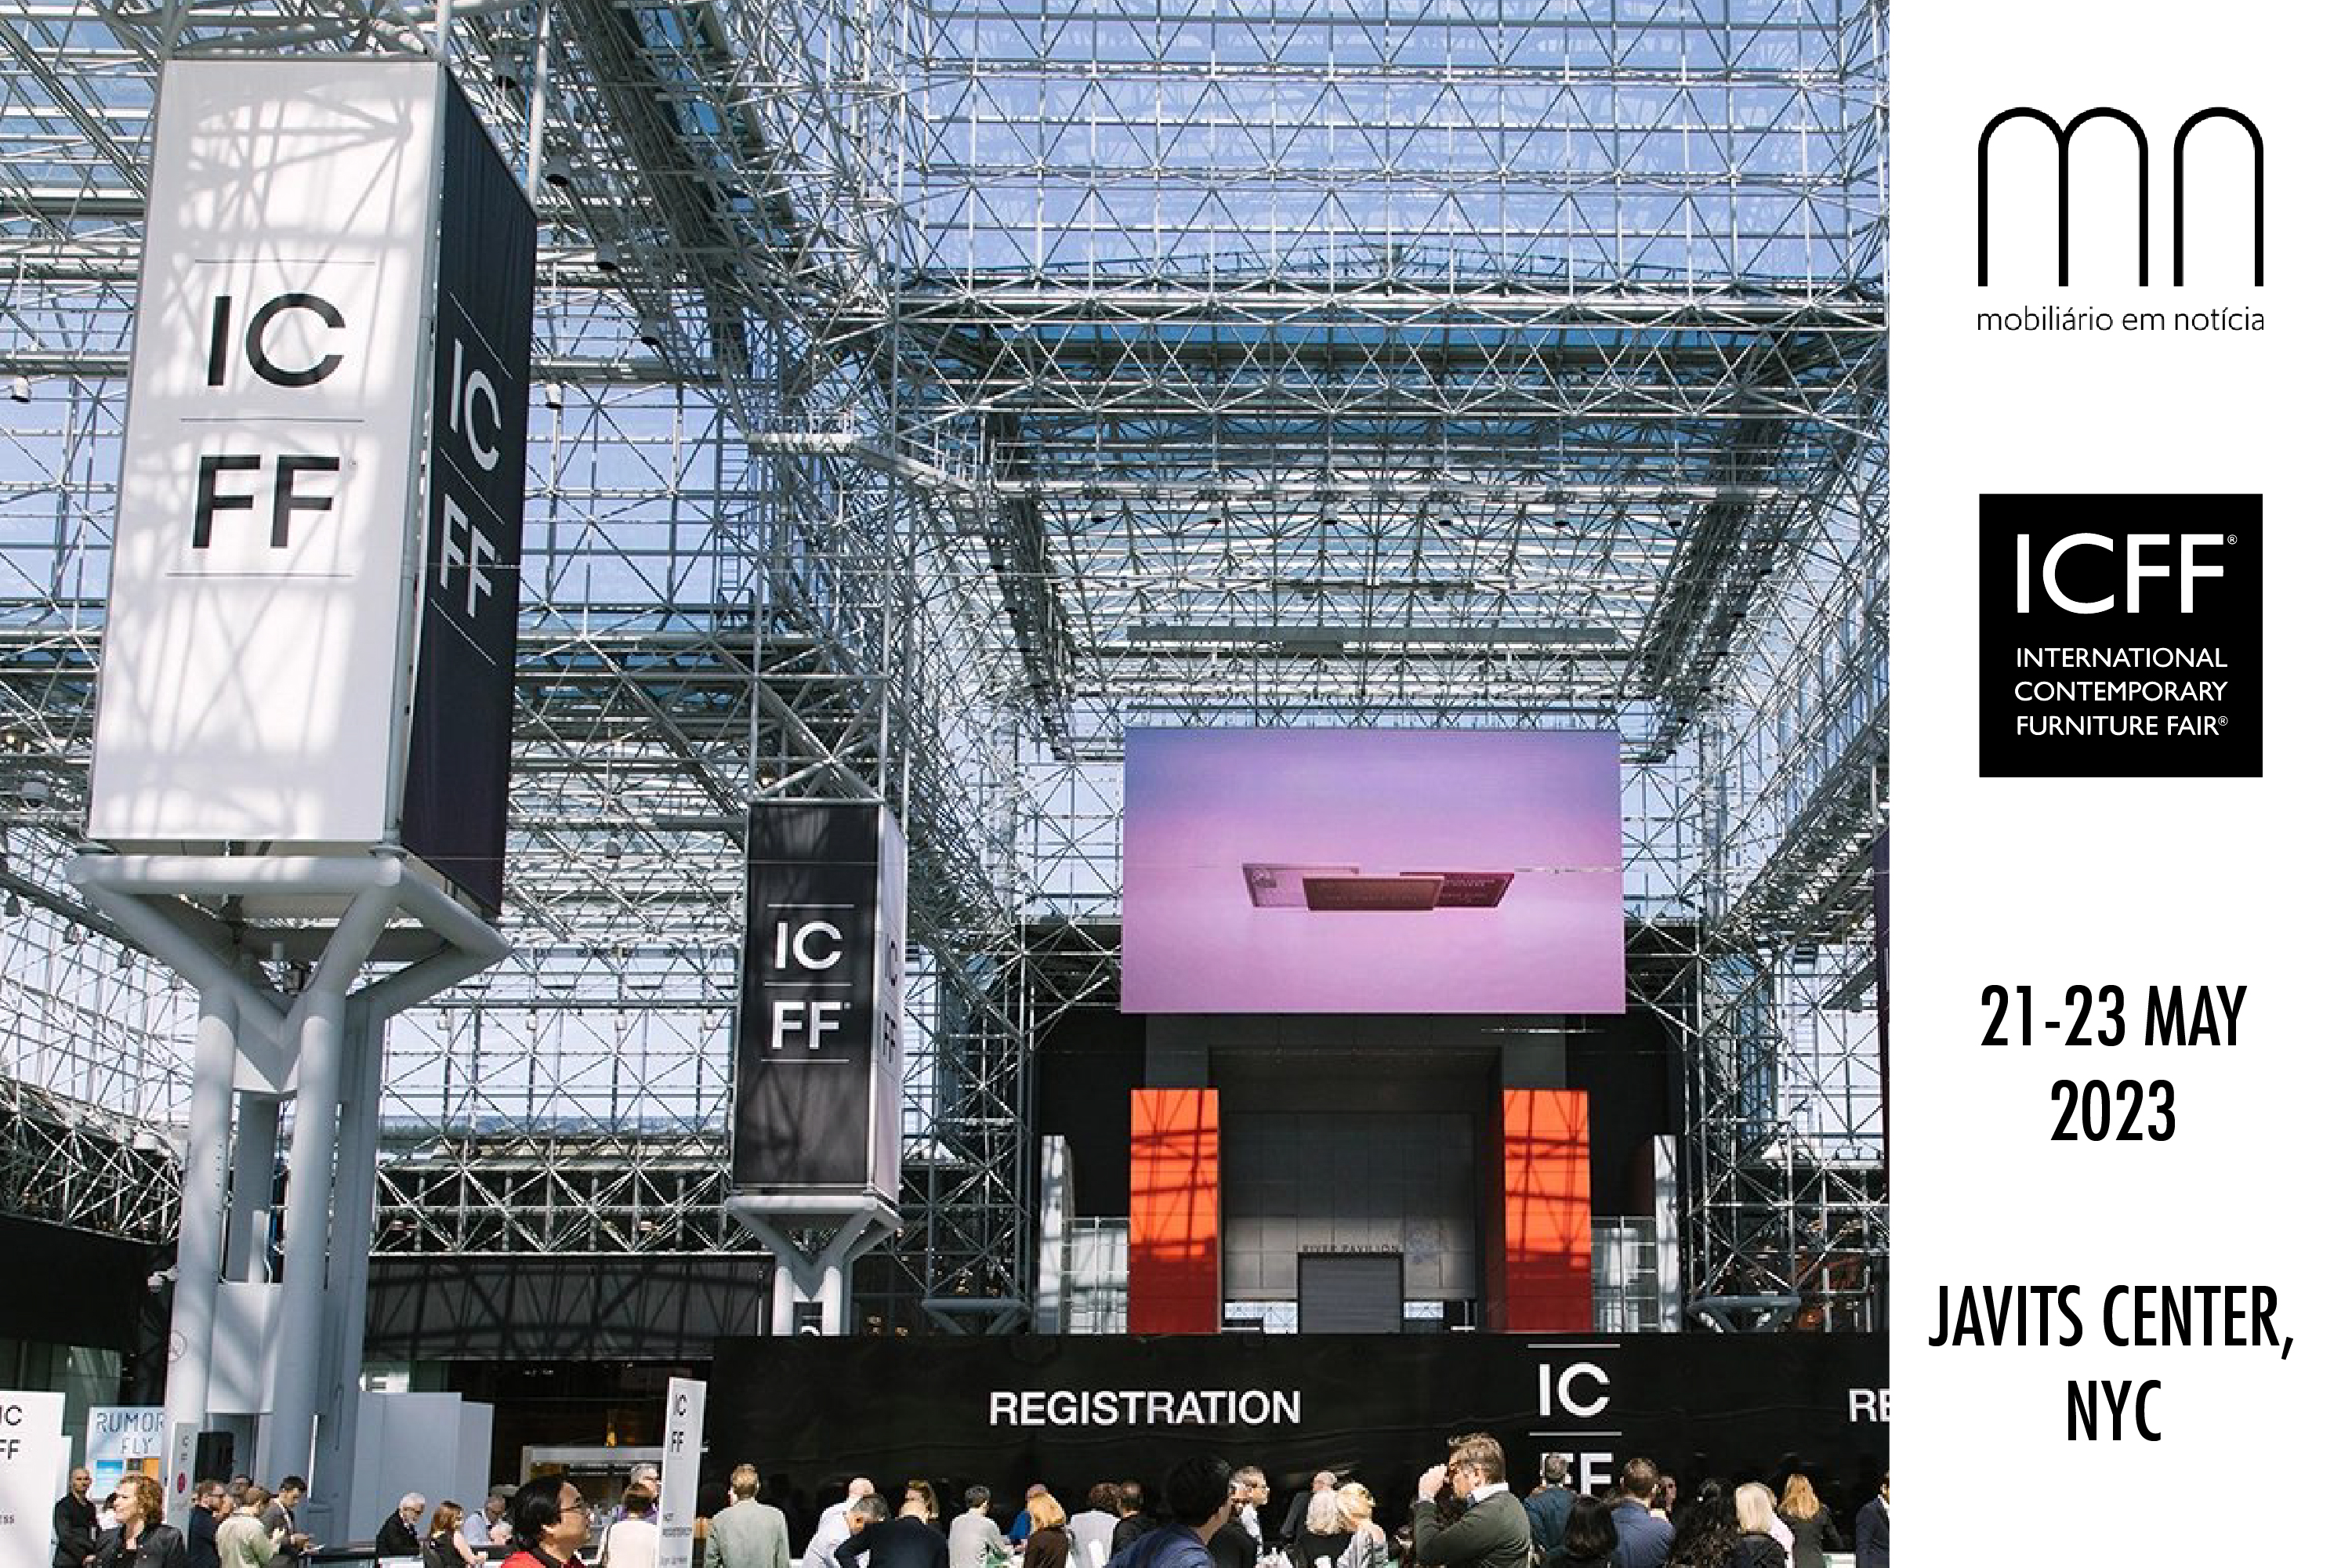 New York hosted the ICFF